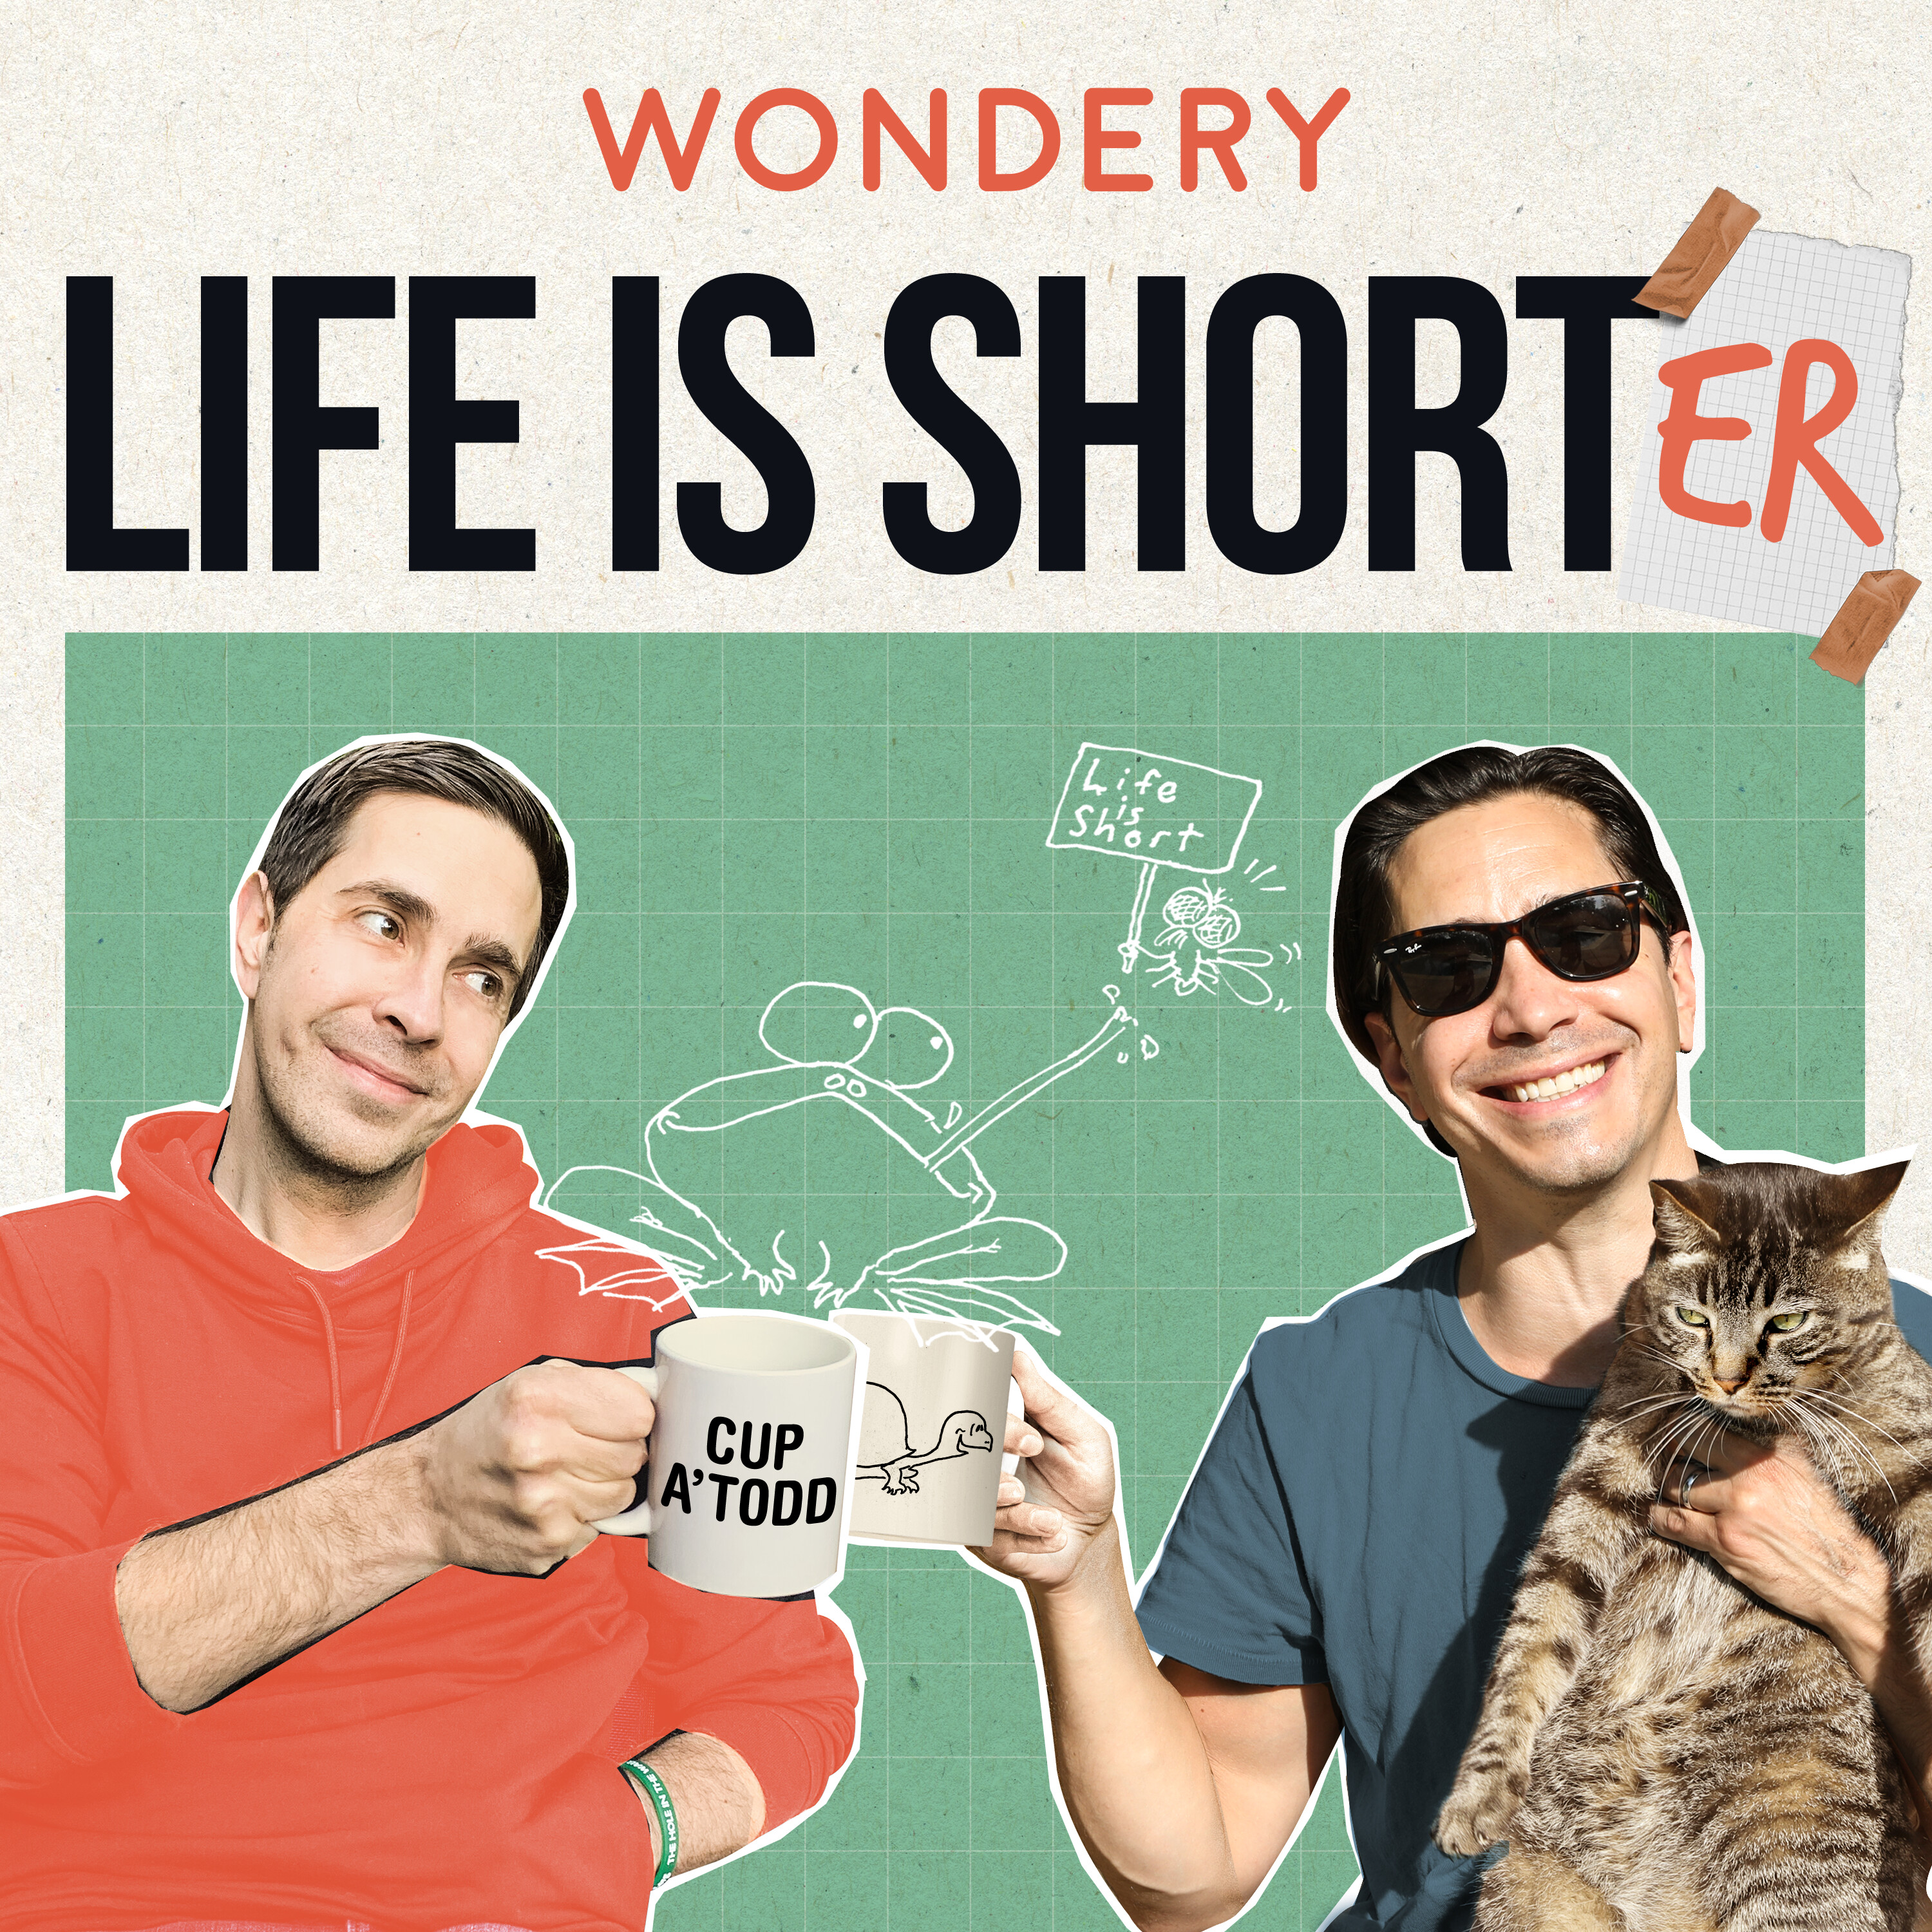 Life Is Short(er): Letting Go, Elder Abuse, and TJ’s Insider 🐄 by Wondery